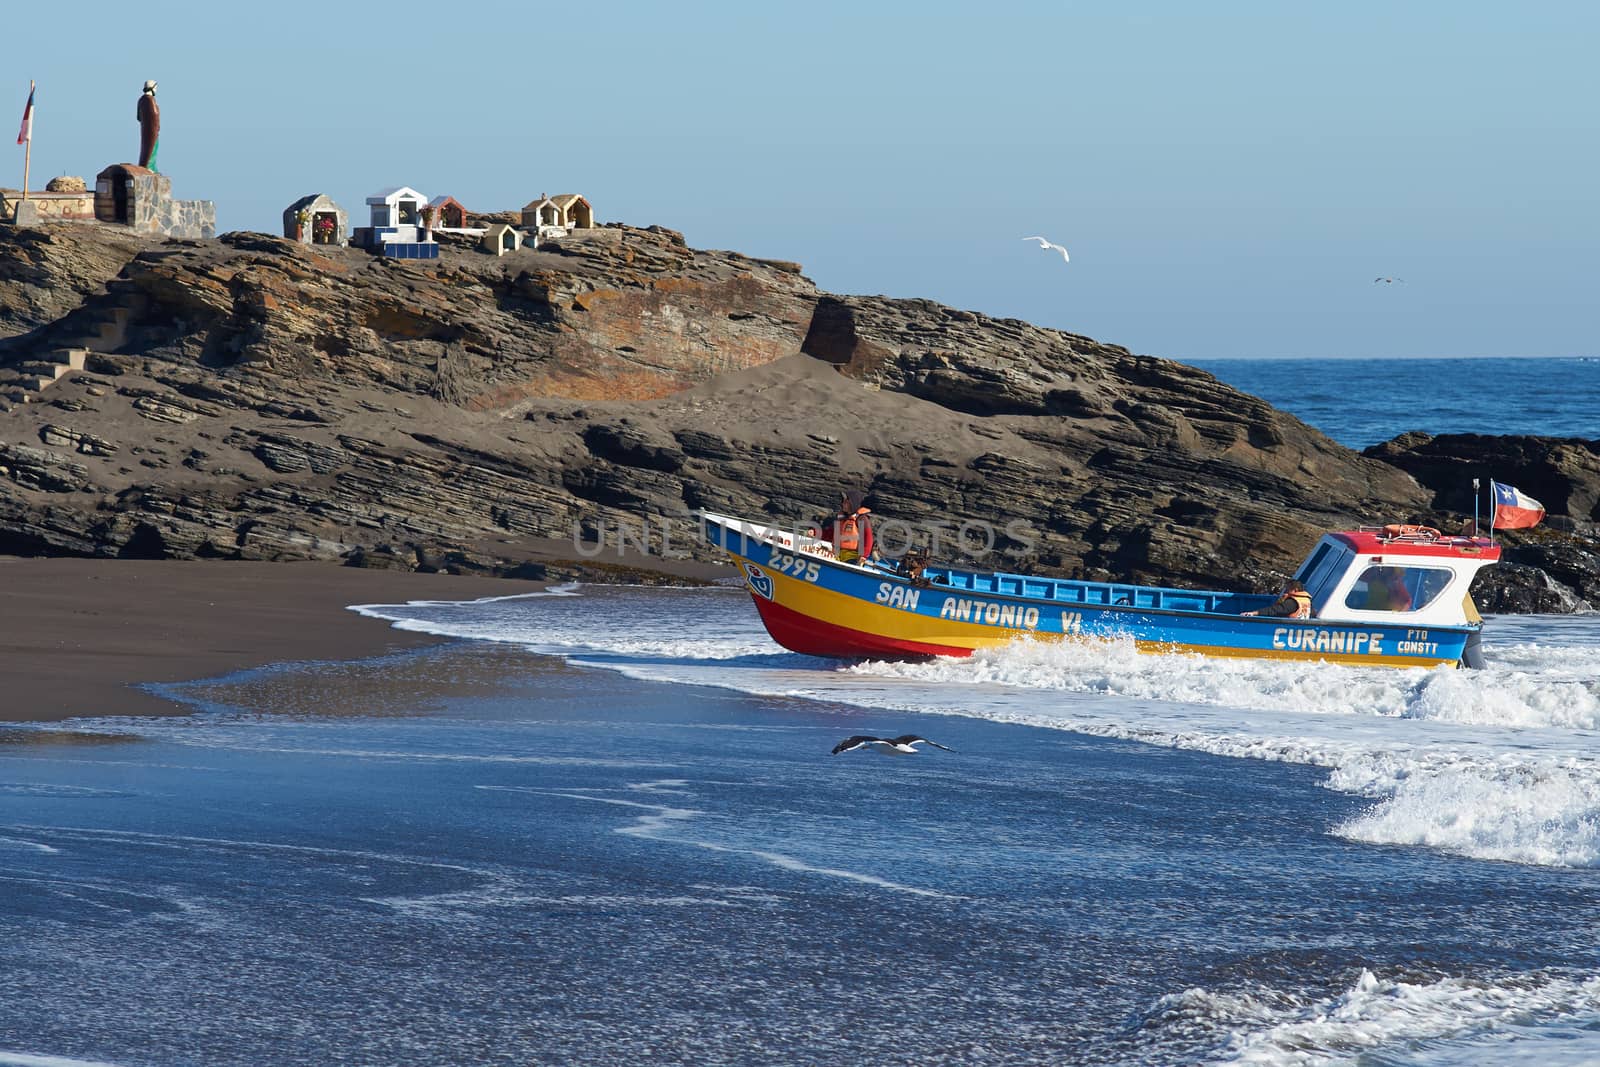 Fishing boat coming ashore on the sandy beach in the fishing village of Curanipe, Chile. Once the boats are beached on the sand, a tractor is used to pull the boats to safer ground.